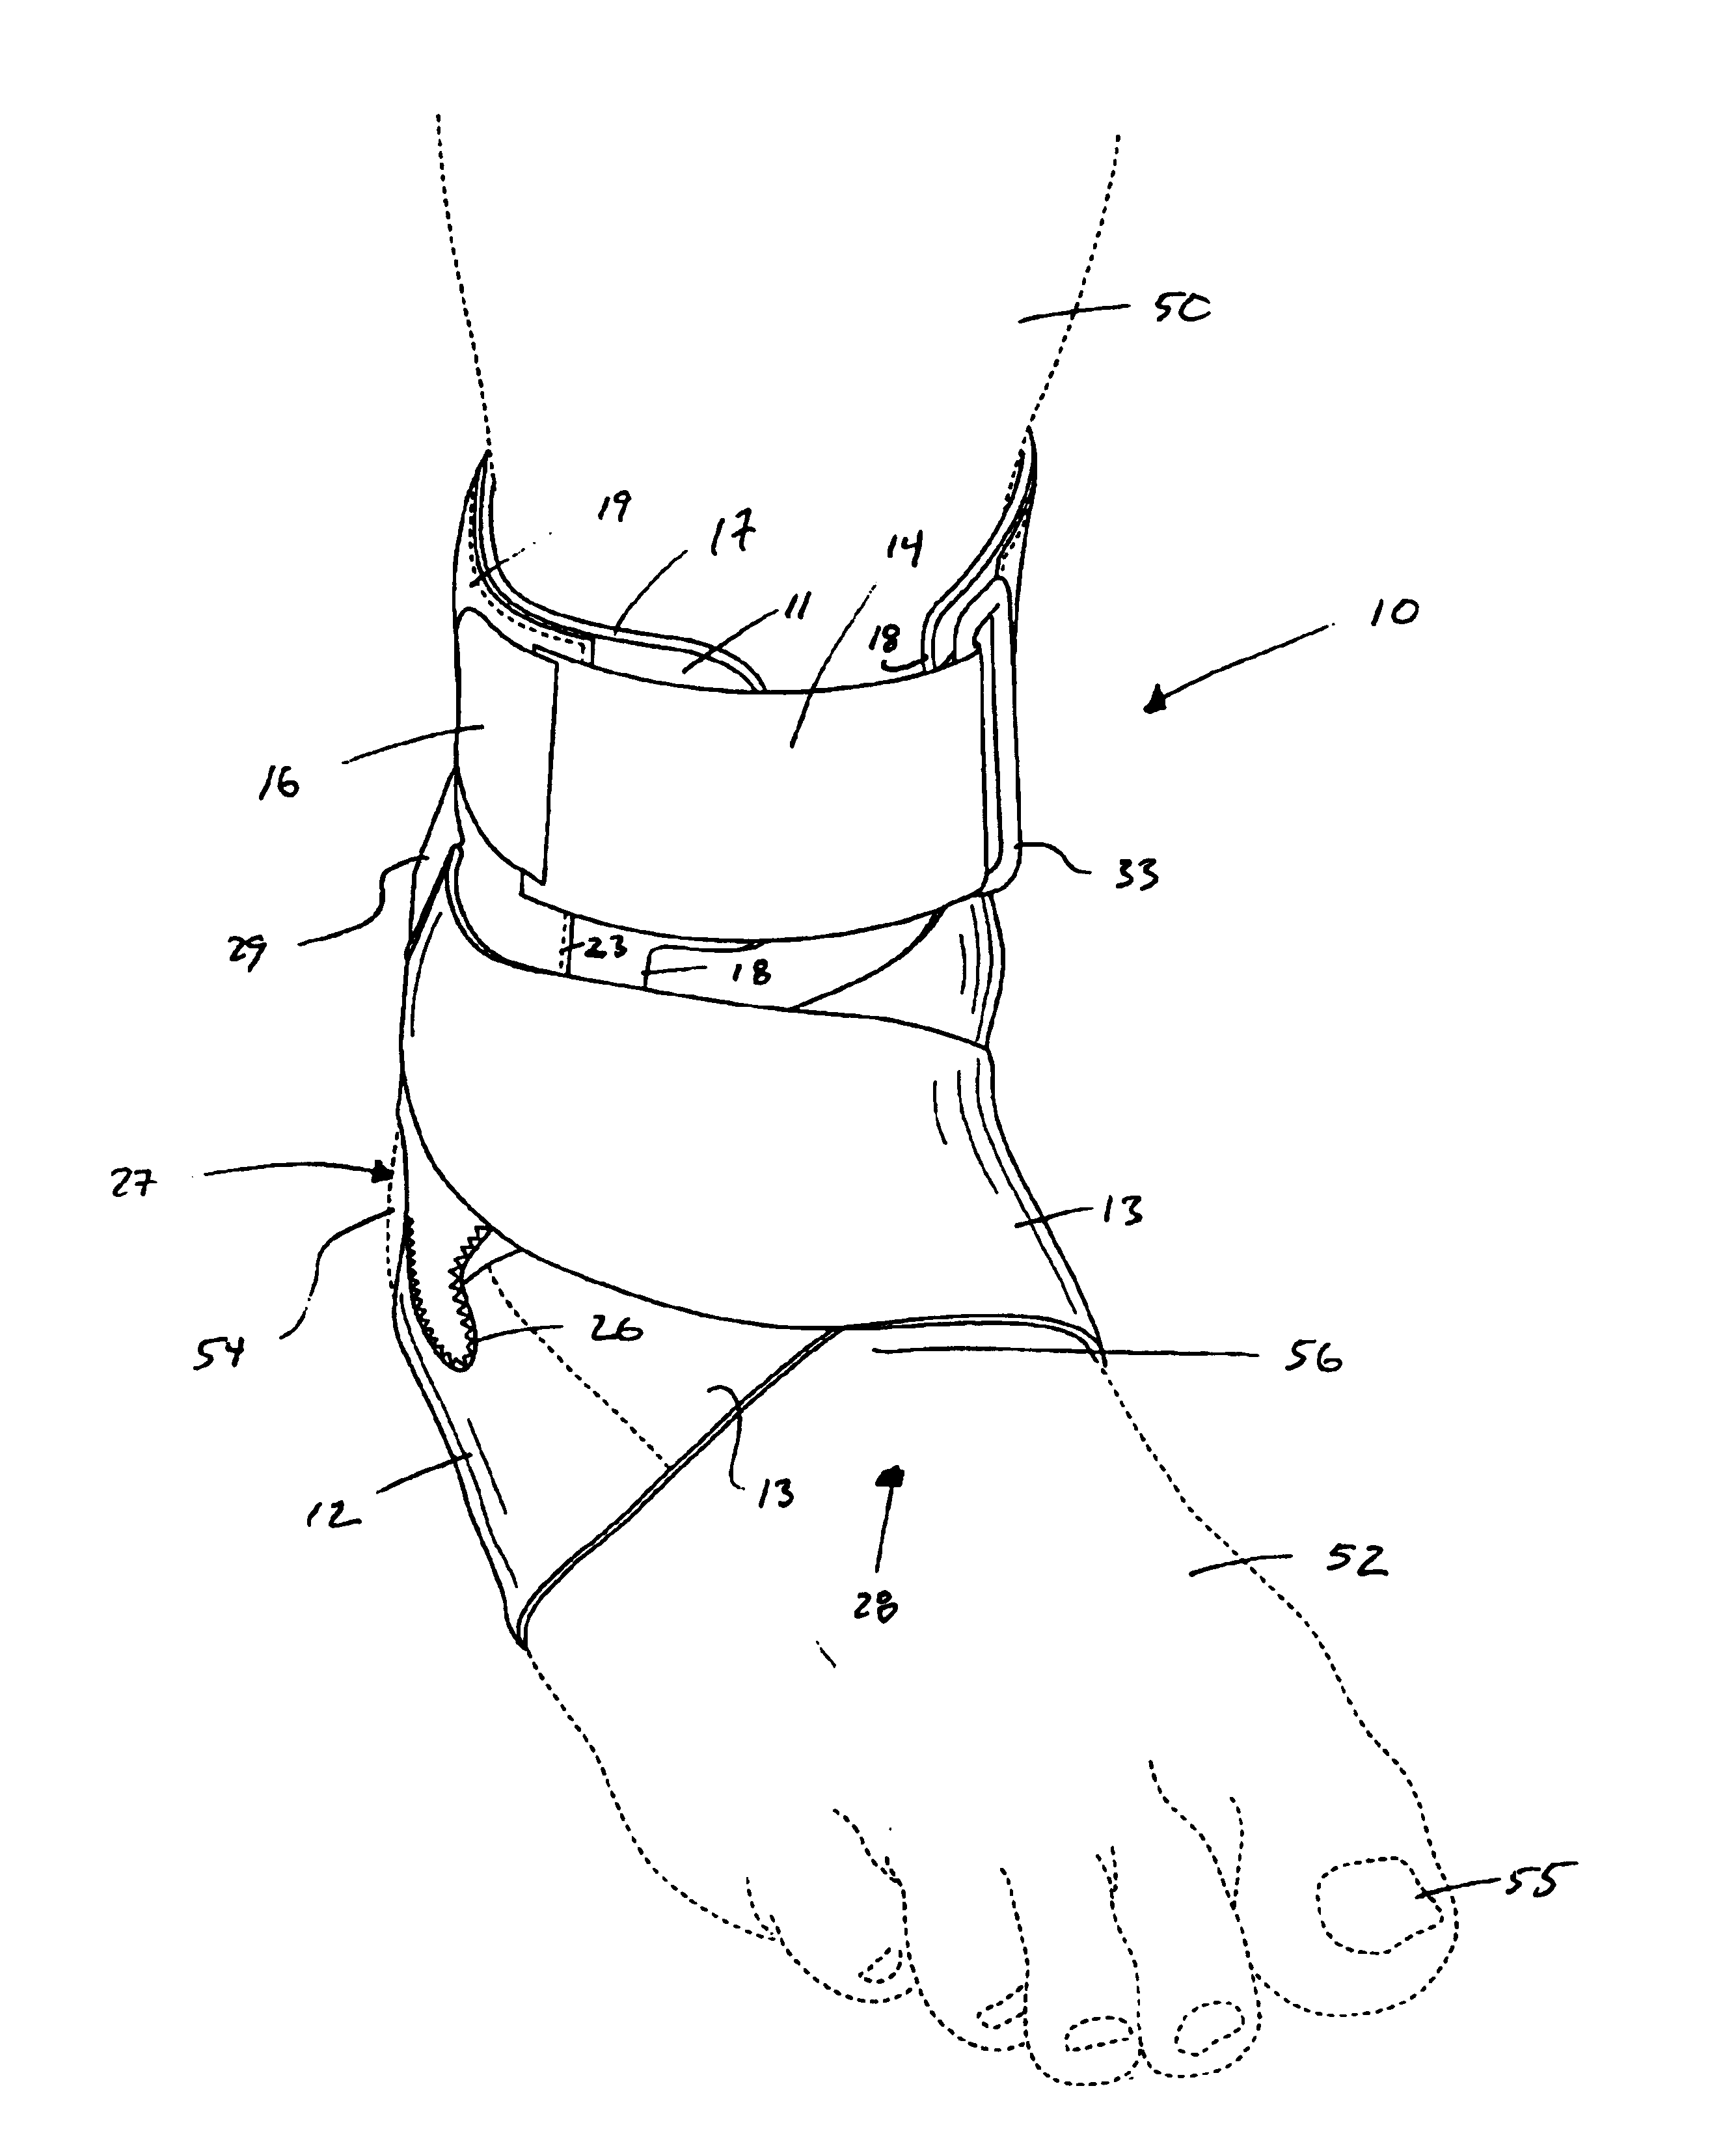 Nonbulky ankle brace for use with footwear